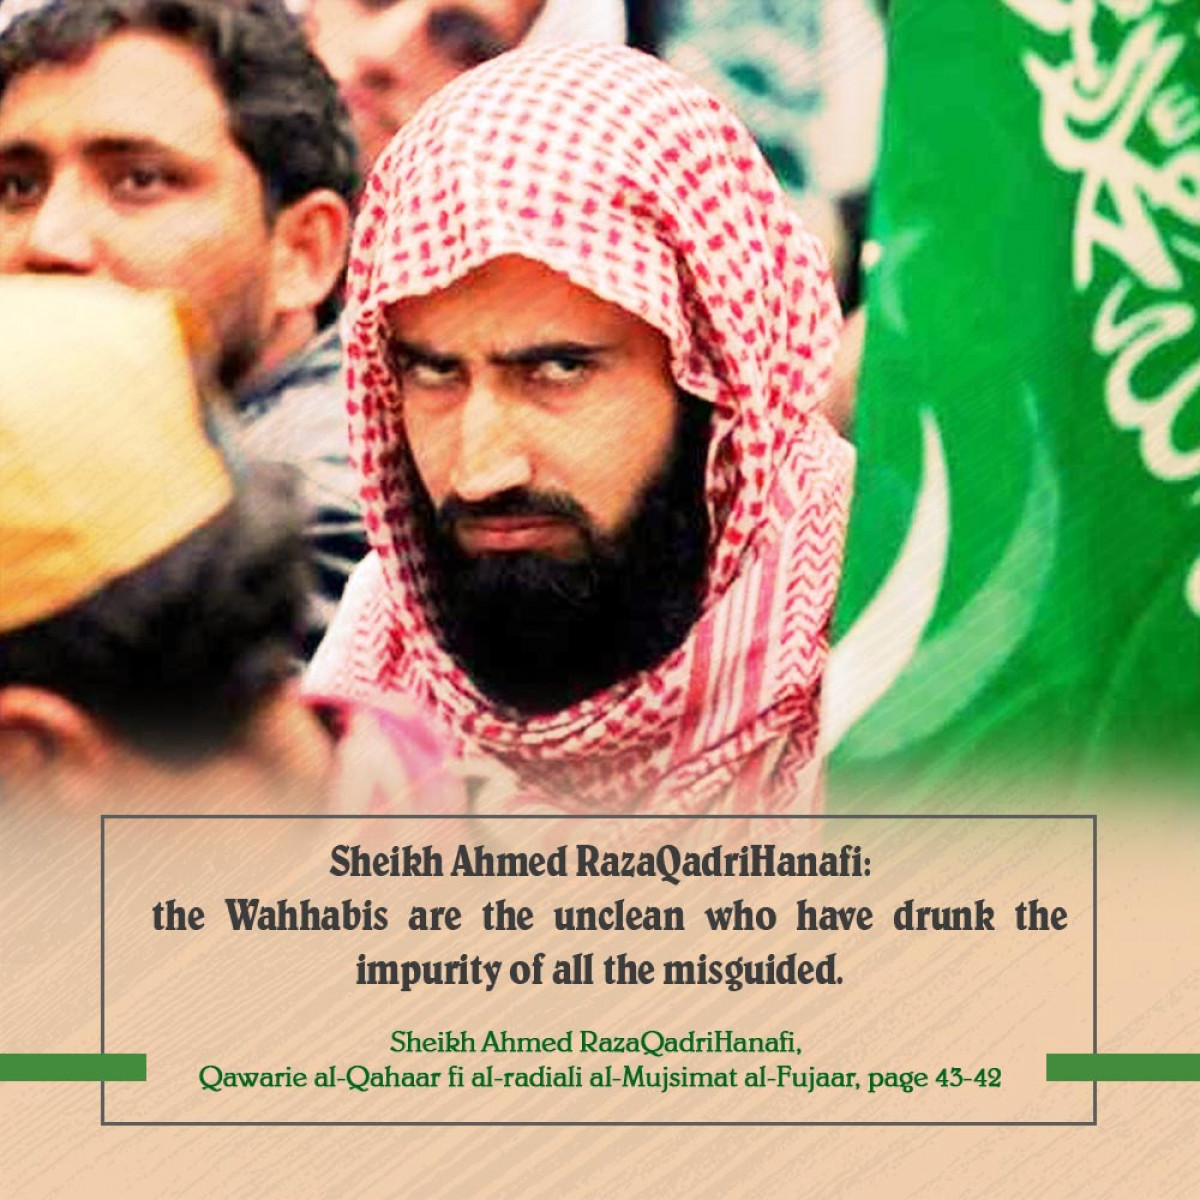 the Wahhabis are the unclean who have drunk the impurity of all the misguided